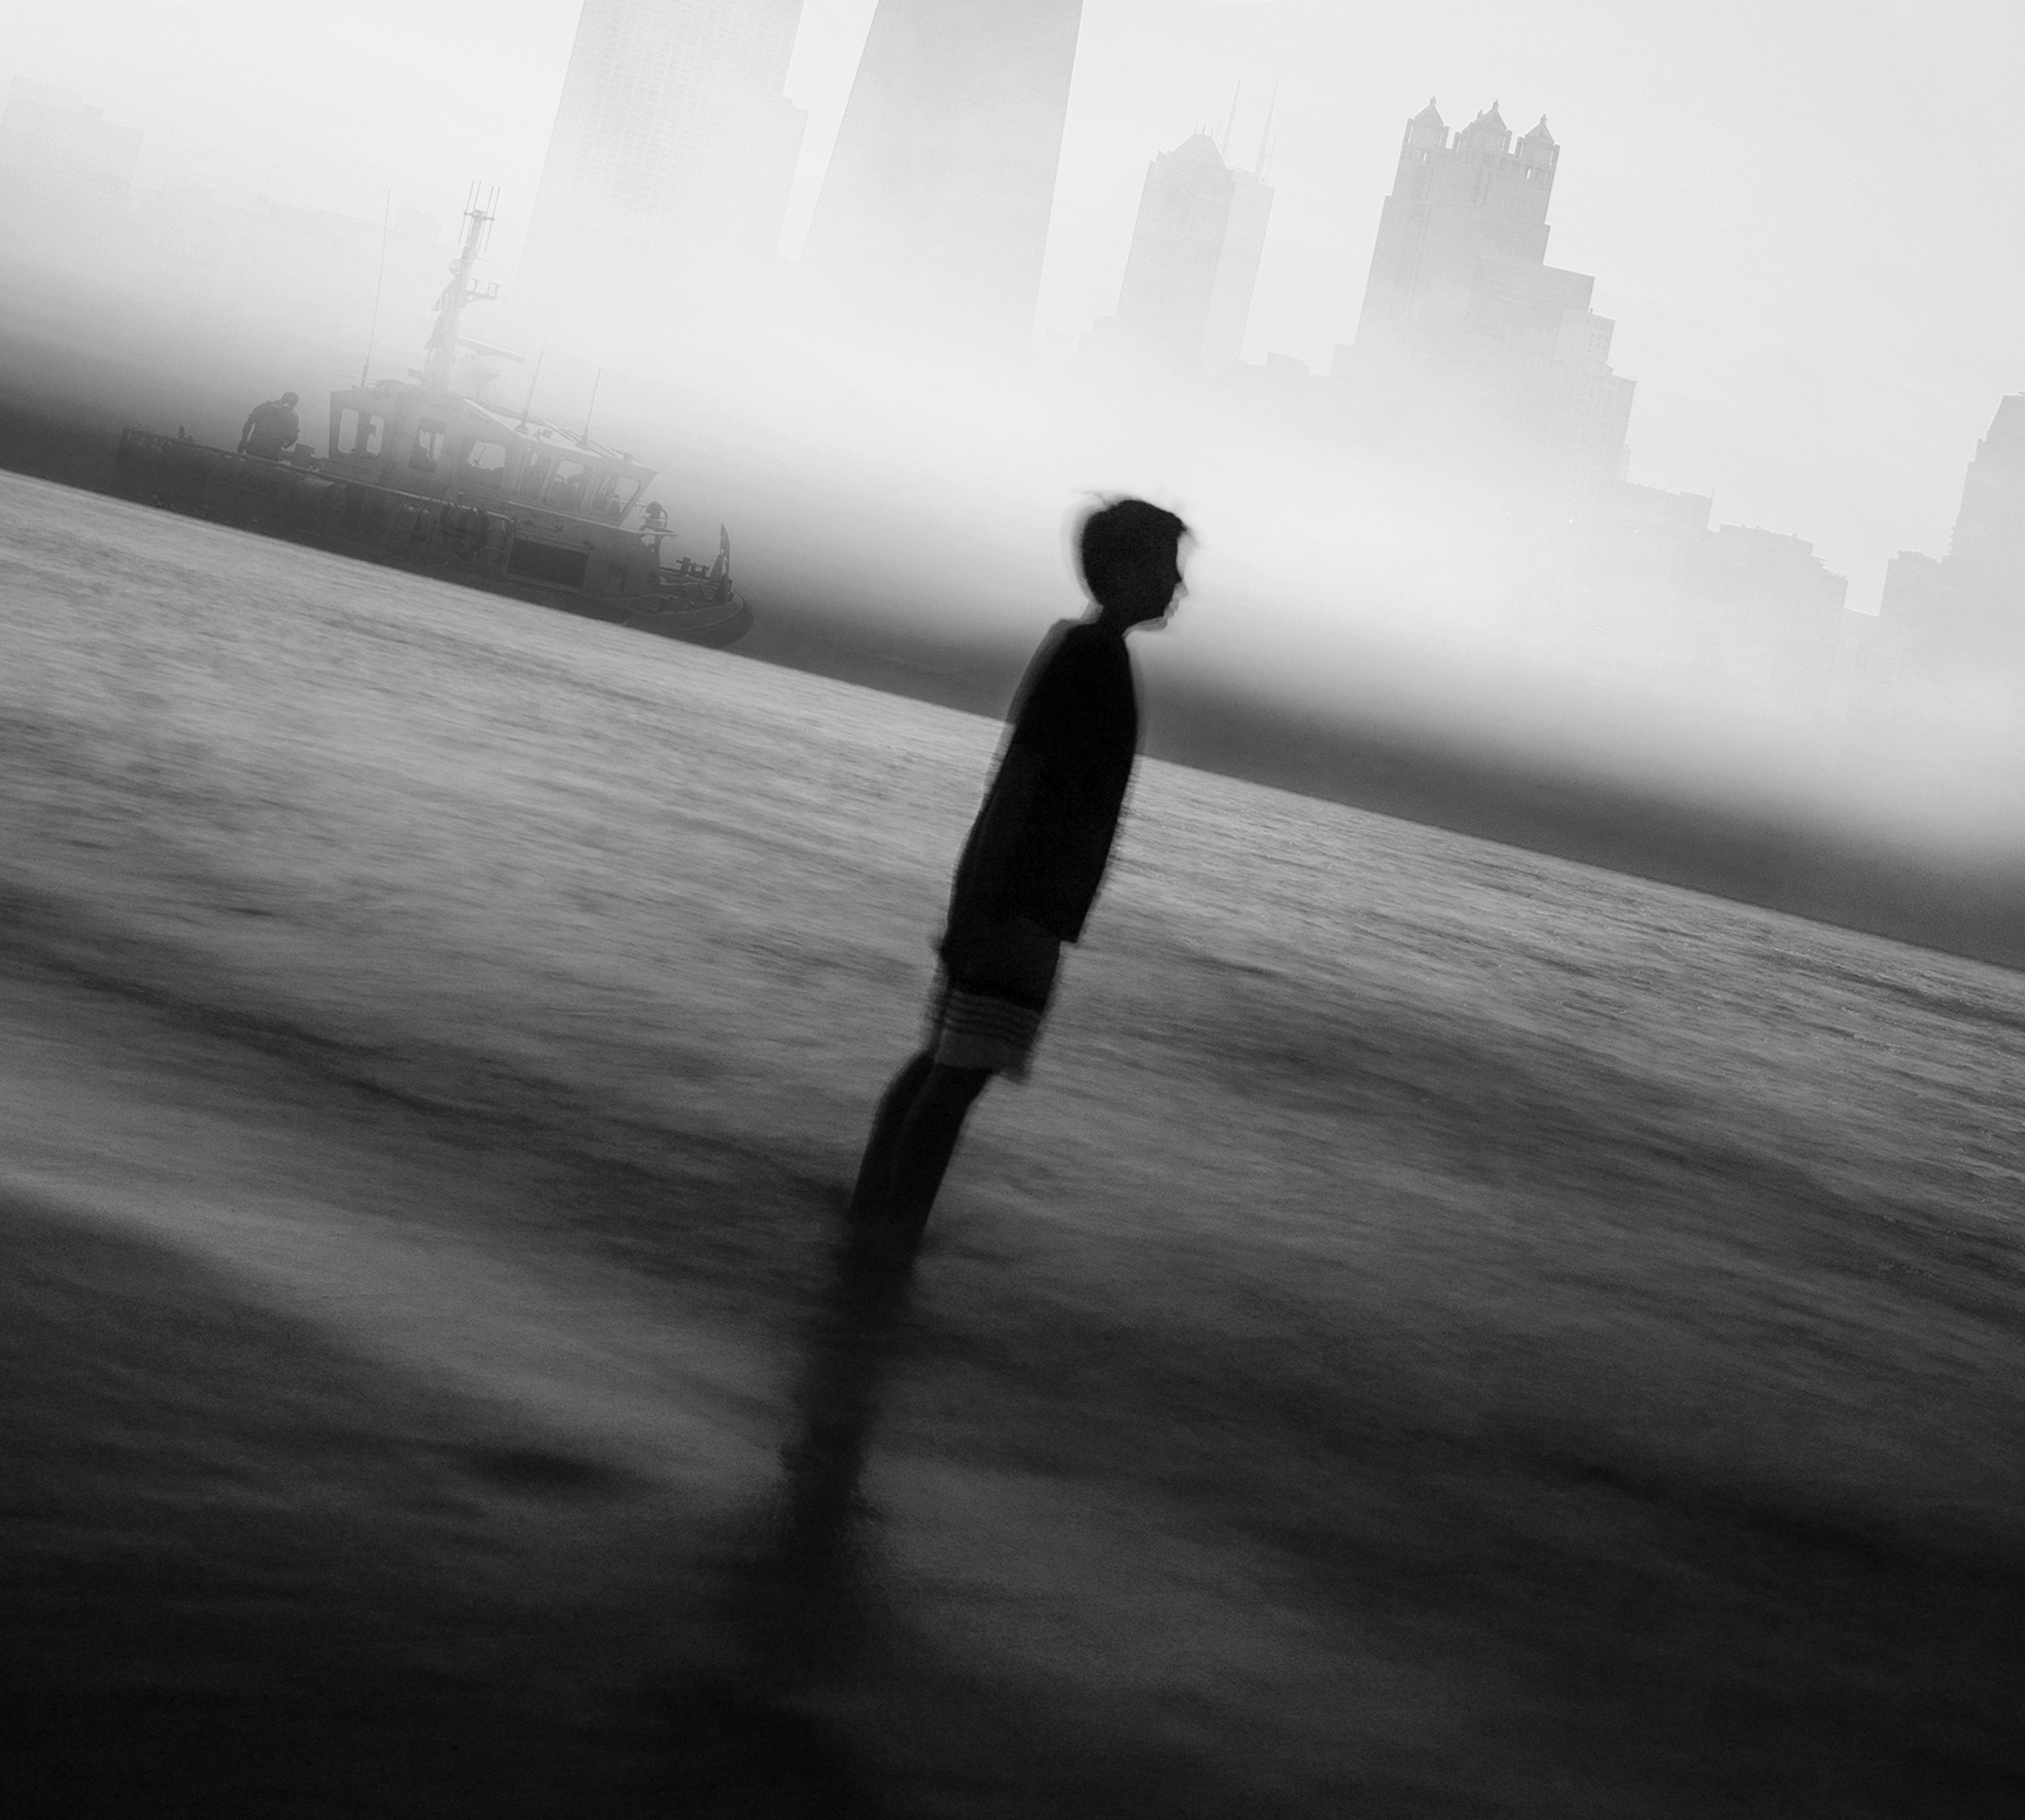 A boy in a T-shirt and shorts is standing ankle deep in a body of water. In the background is a boat, and beyond it are skyscrapers. The boat and buildings are shrouded in a mist, and the image has been rotated slightly to the right.